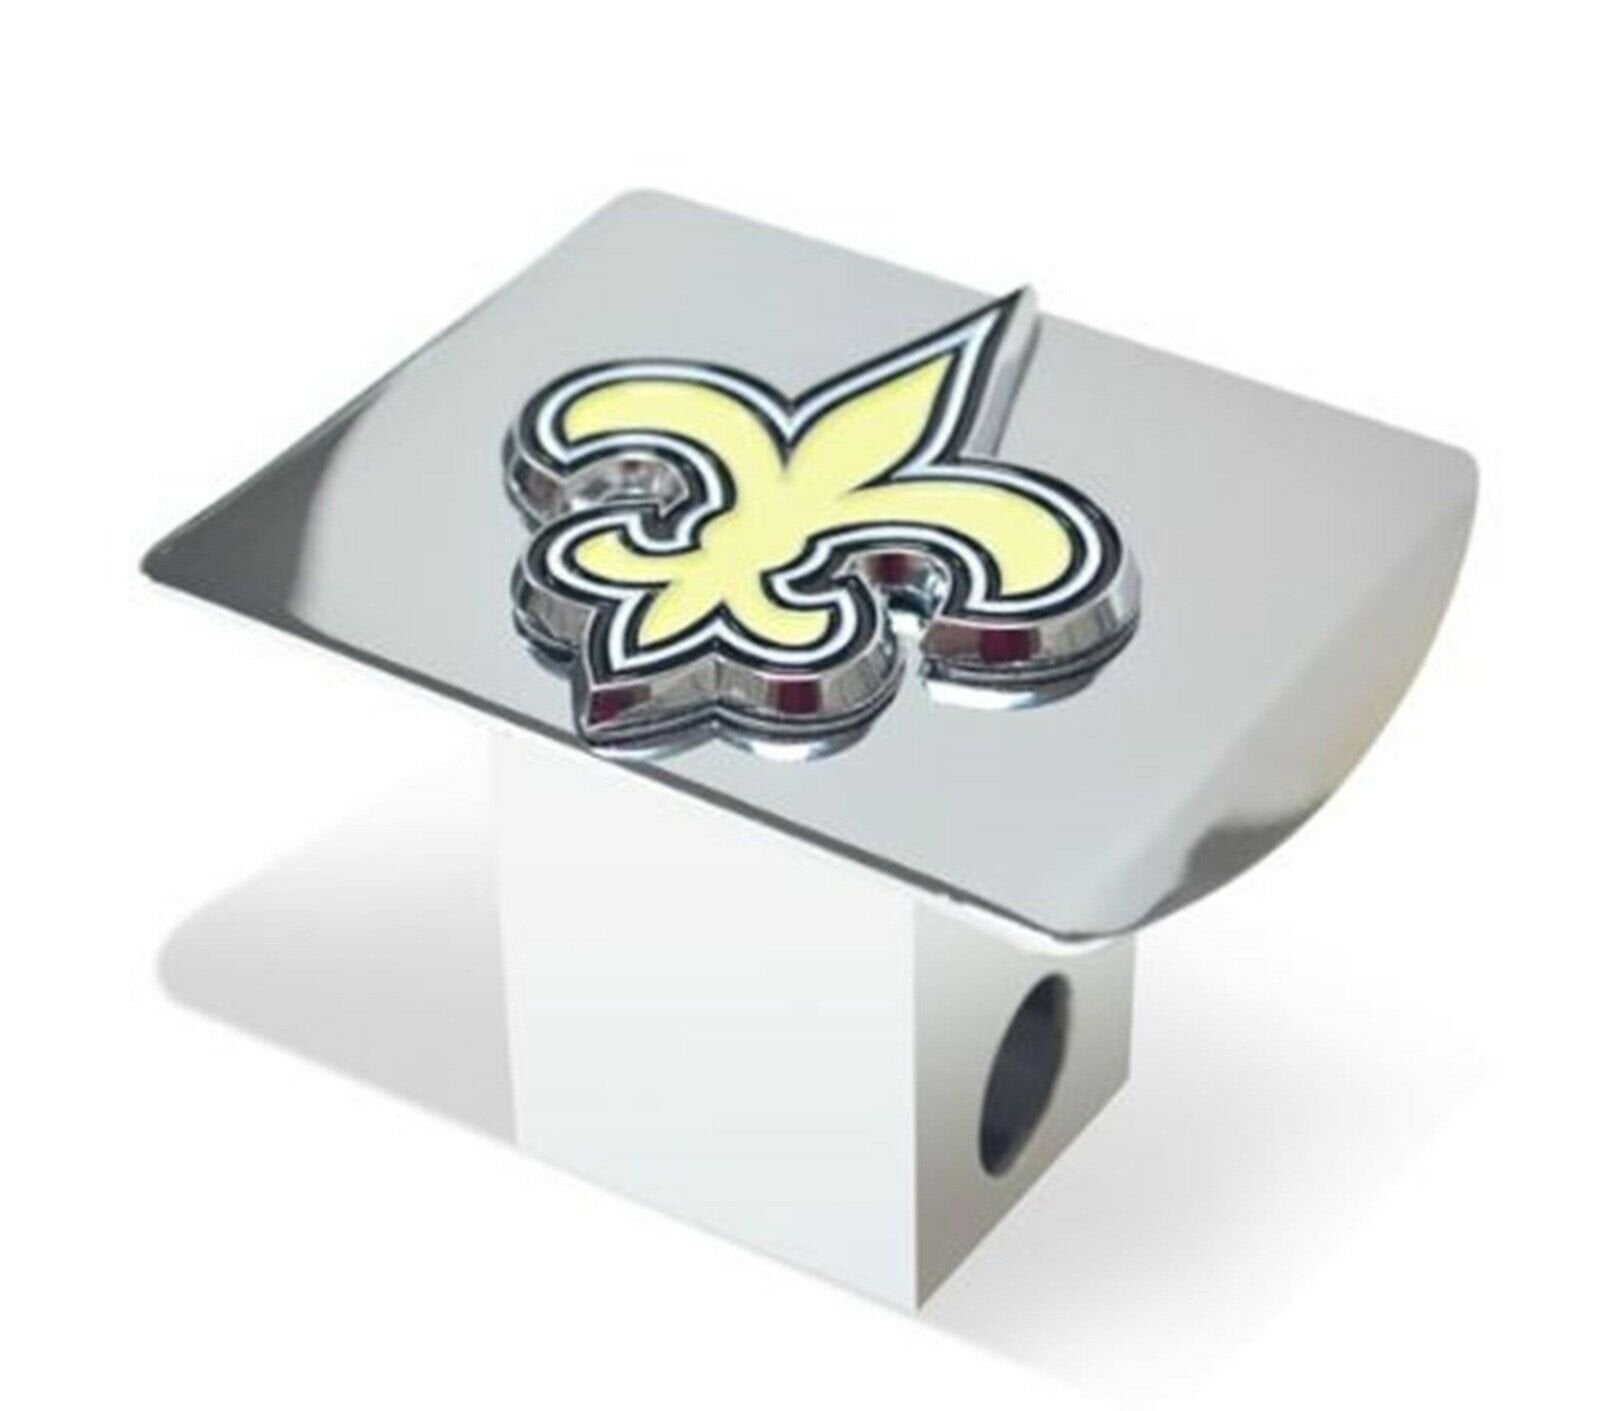 Cleveland Indians Hitch Cover Solid Metal with Raised Color Metal Emblem 2" Square Type III